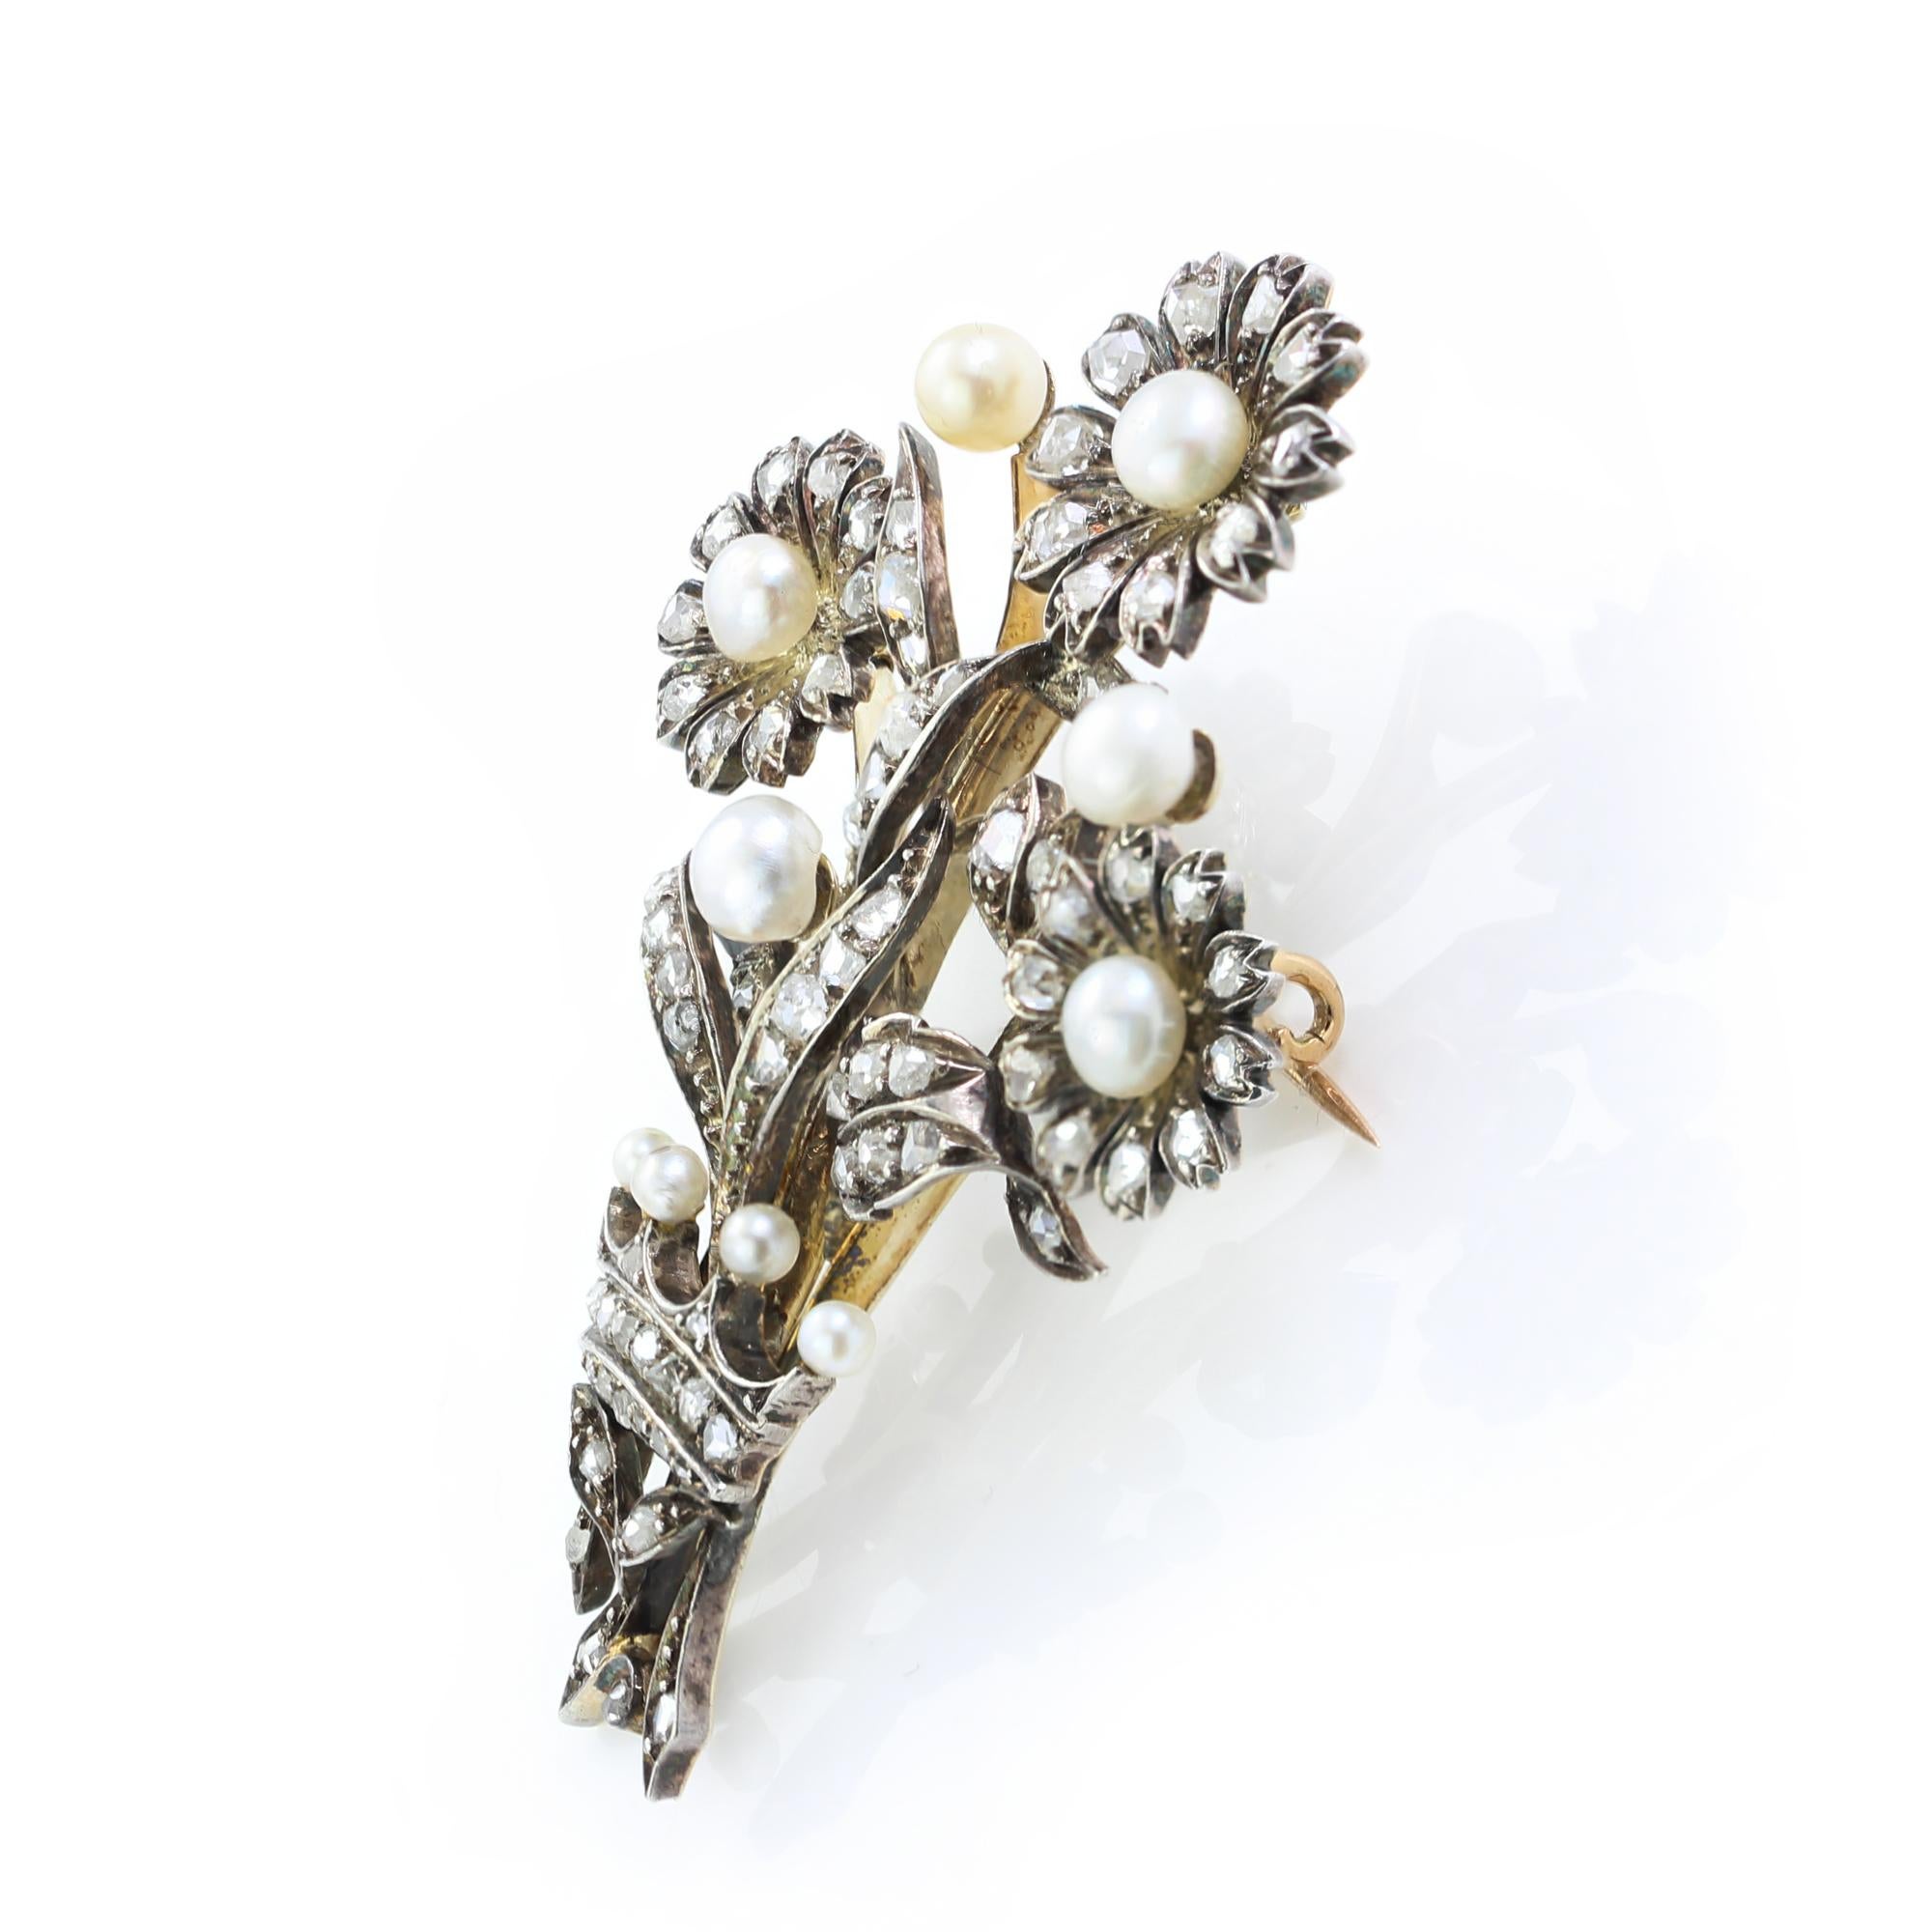 Antique Early Victorian 15kt Gold and Silver, Pearl and Diamond Brooch In Excellent Condition For Sale In Braintree, GB